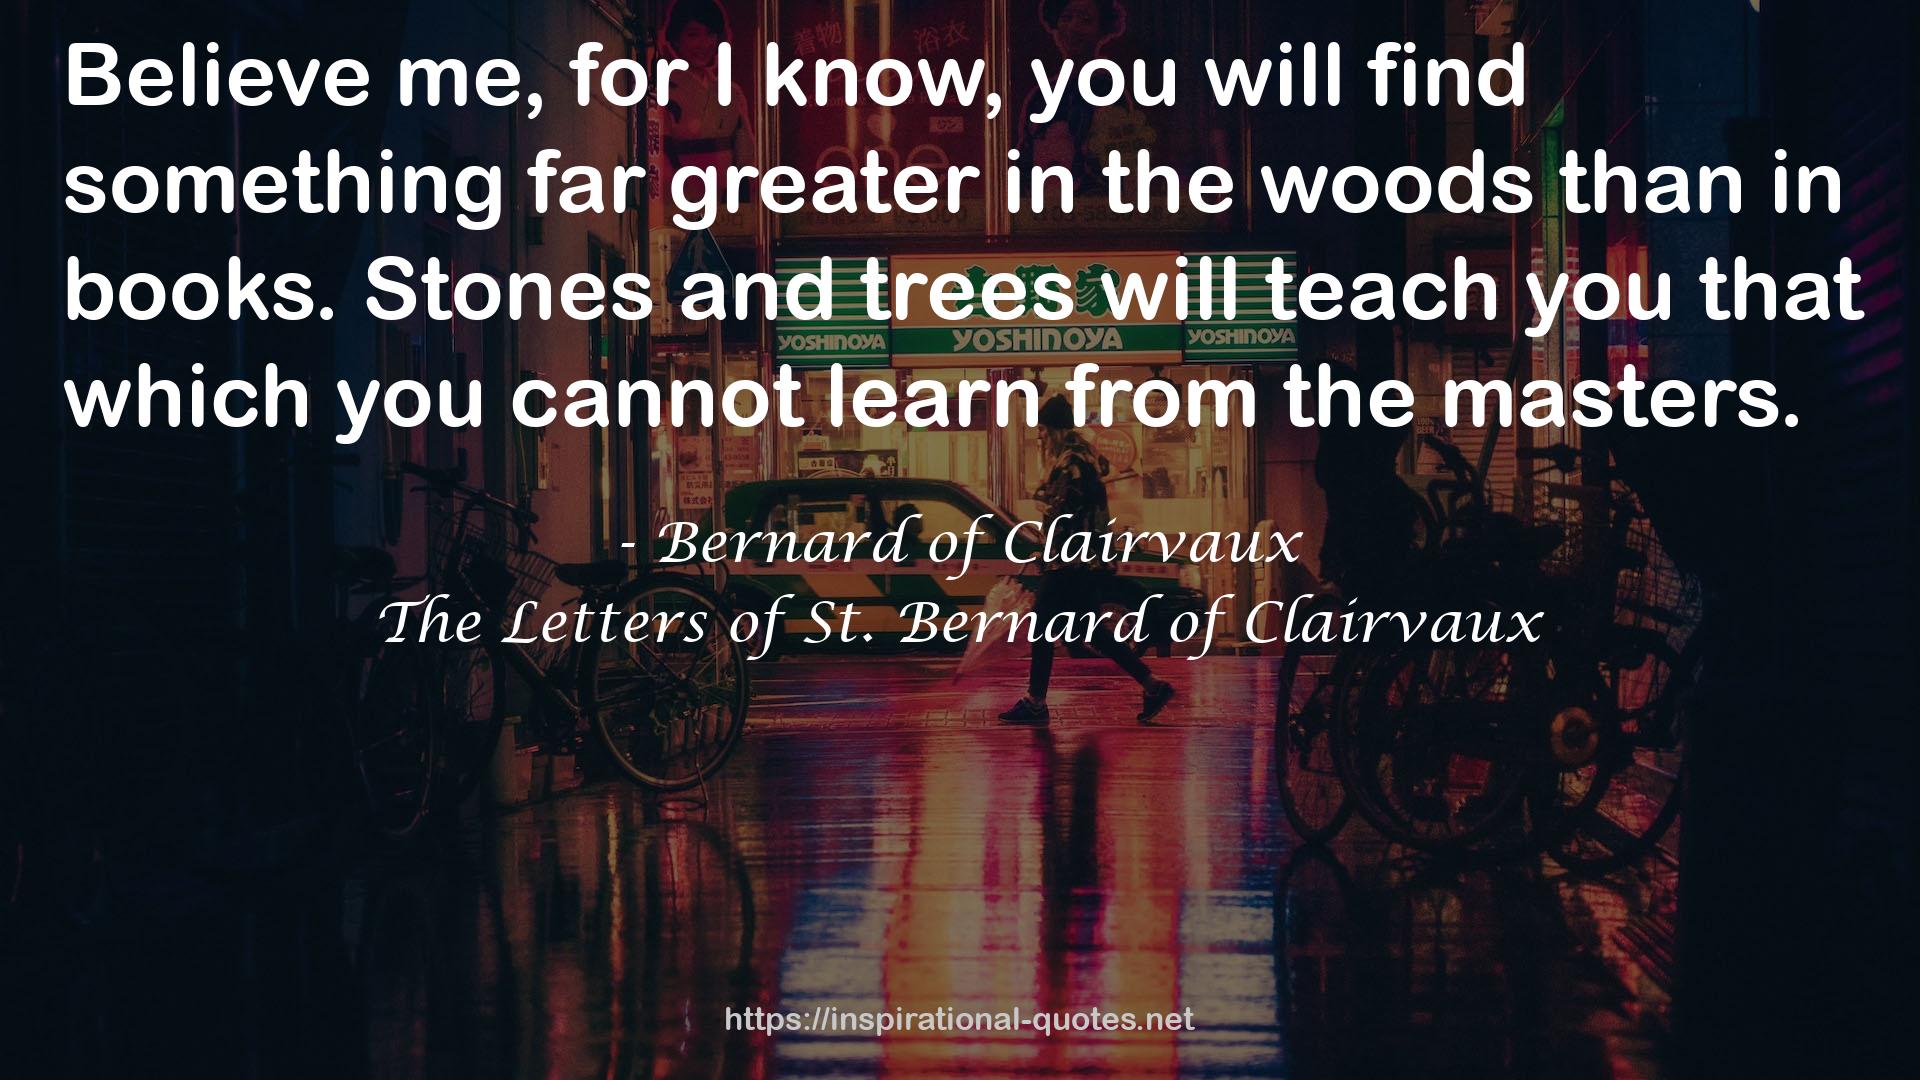 The Letters of St. Bernard of Clairvaux QUOTES